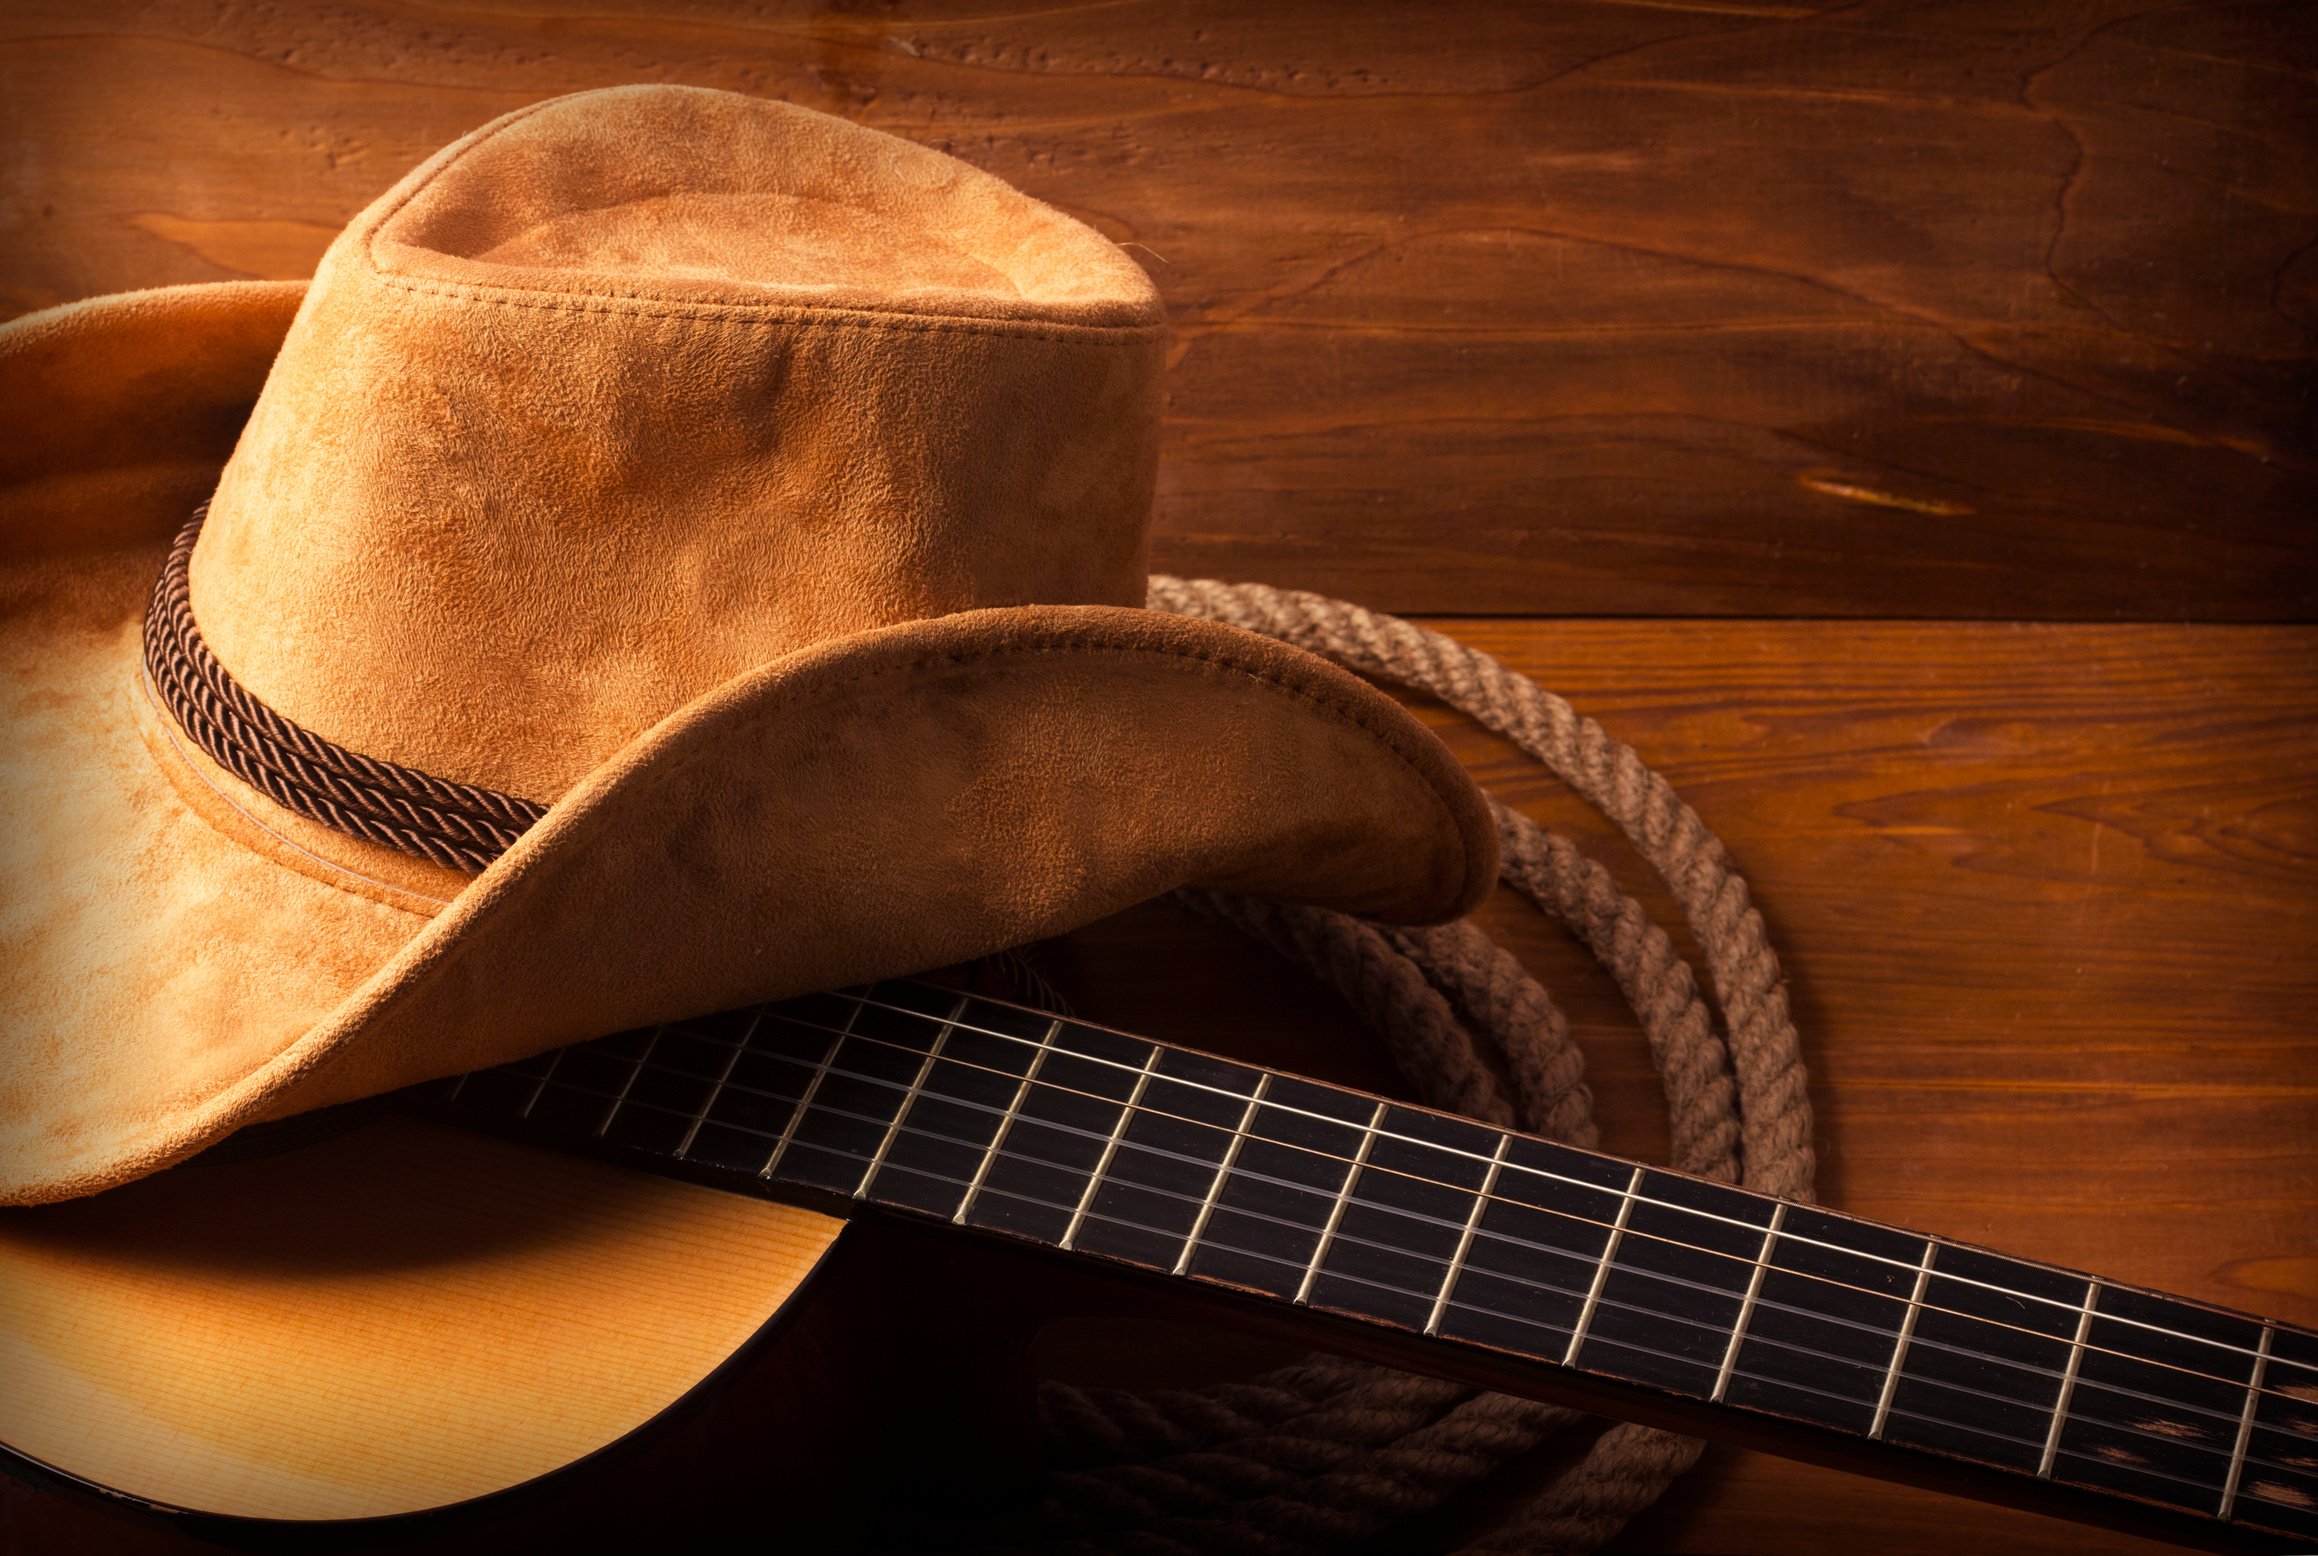 Country music background with guitar